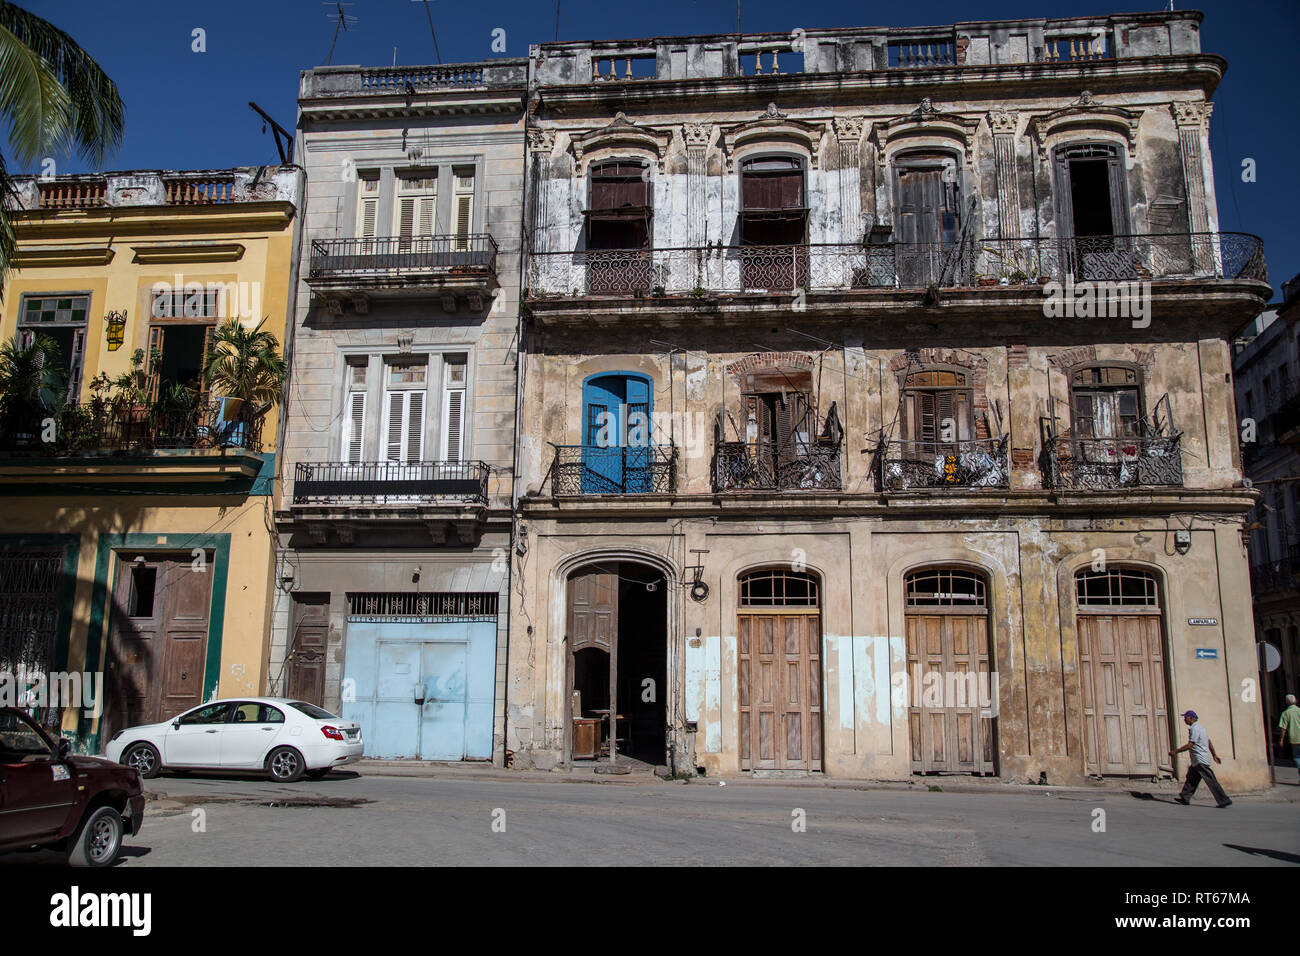 Typical cuban houses in poor condition on one of the streets in Old Town in  Havana, Cuba Stock Photo - Alamy